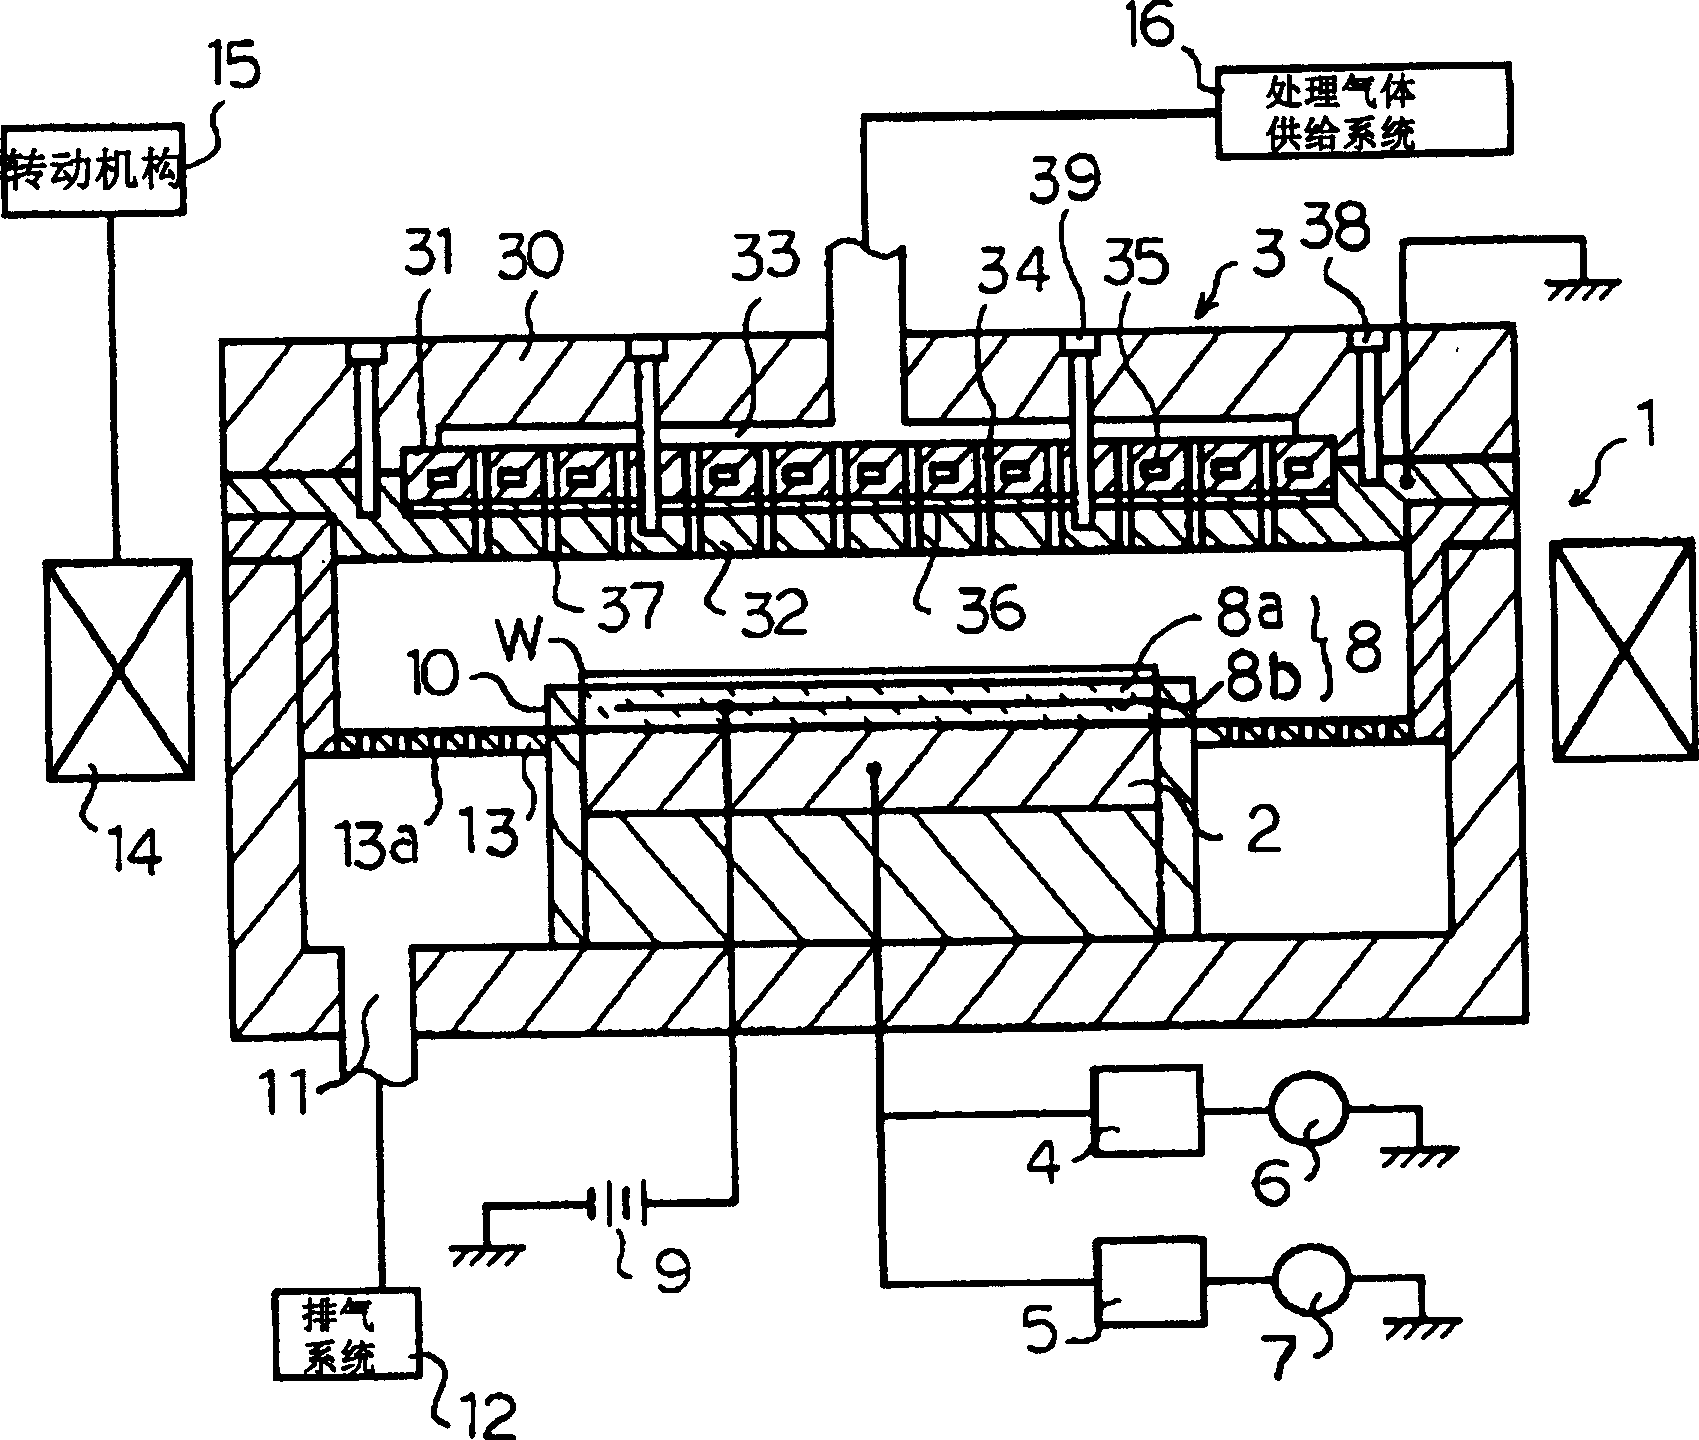 Upper electrode and plasma processing device